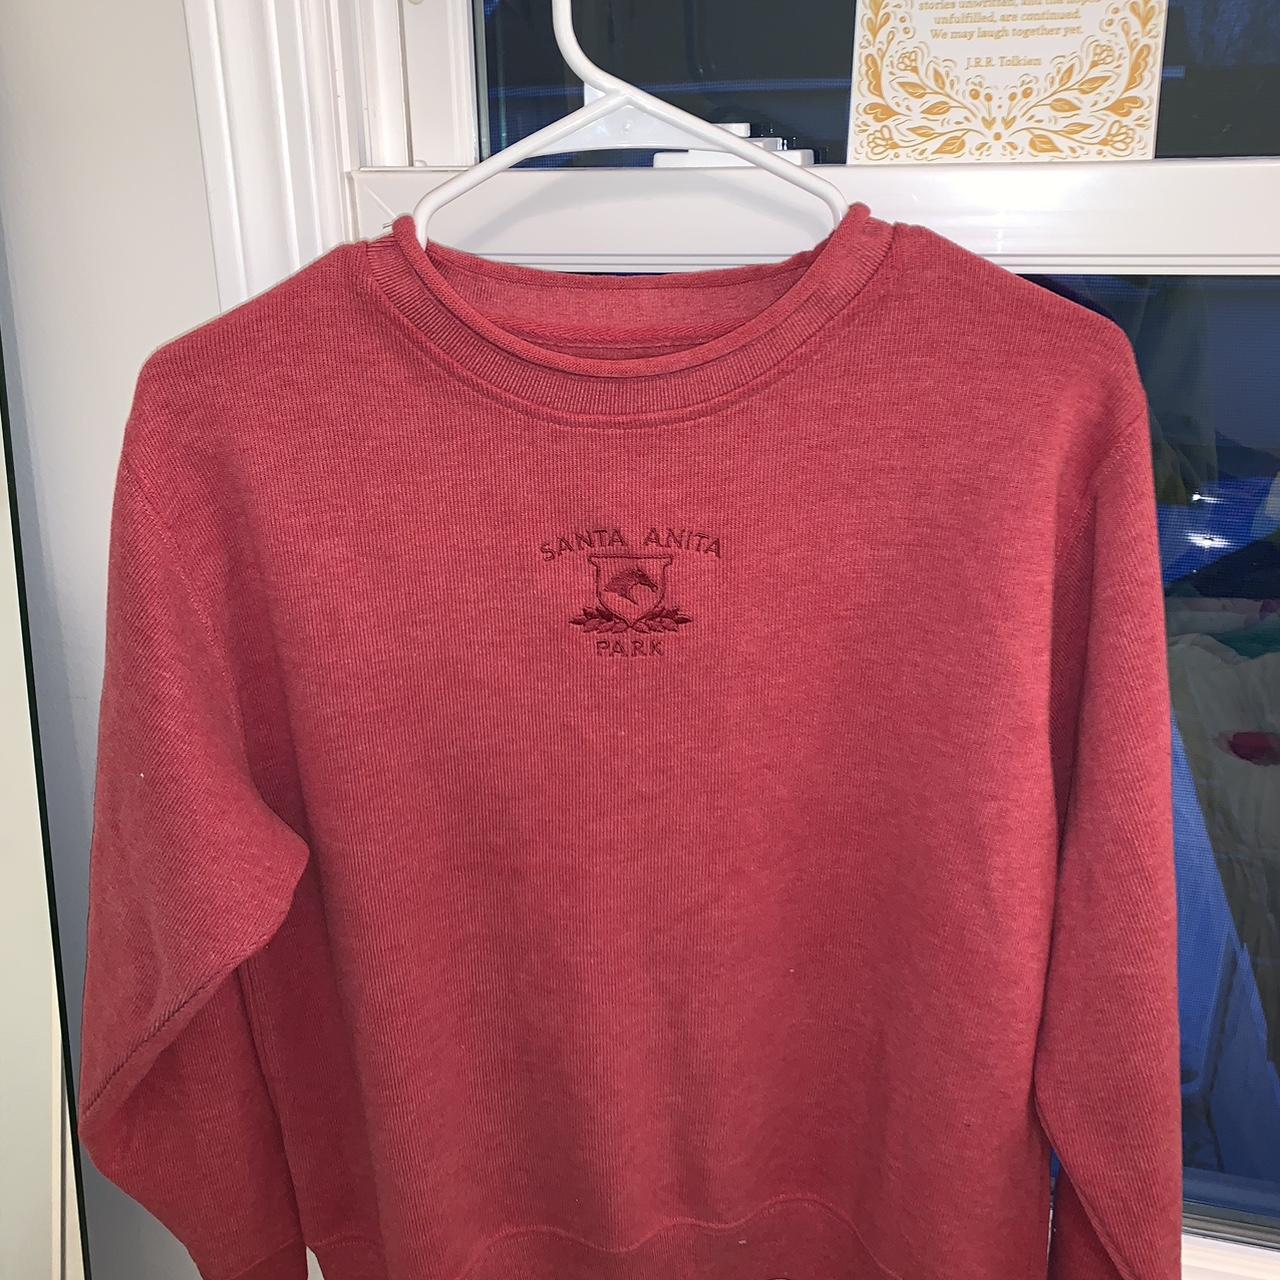 Women's Pink and Red Jumper | Depop